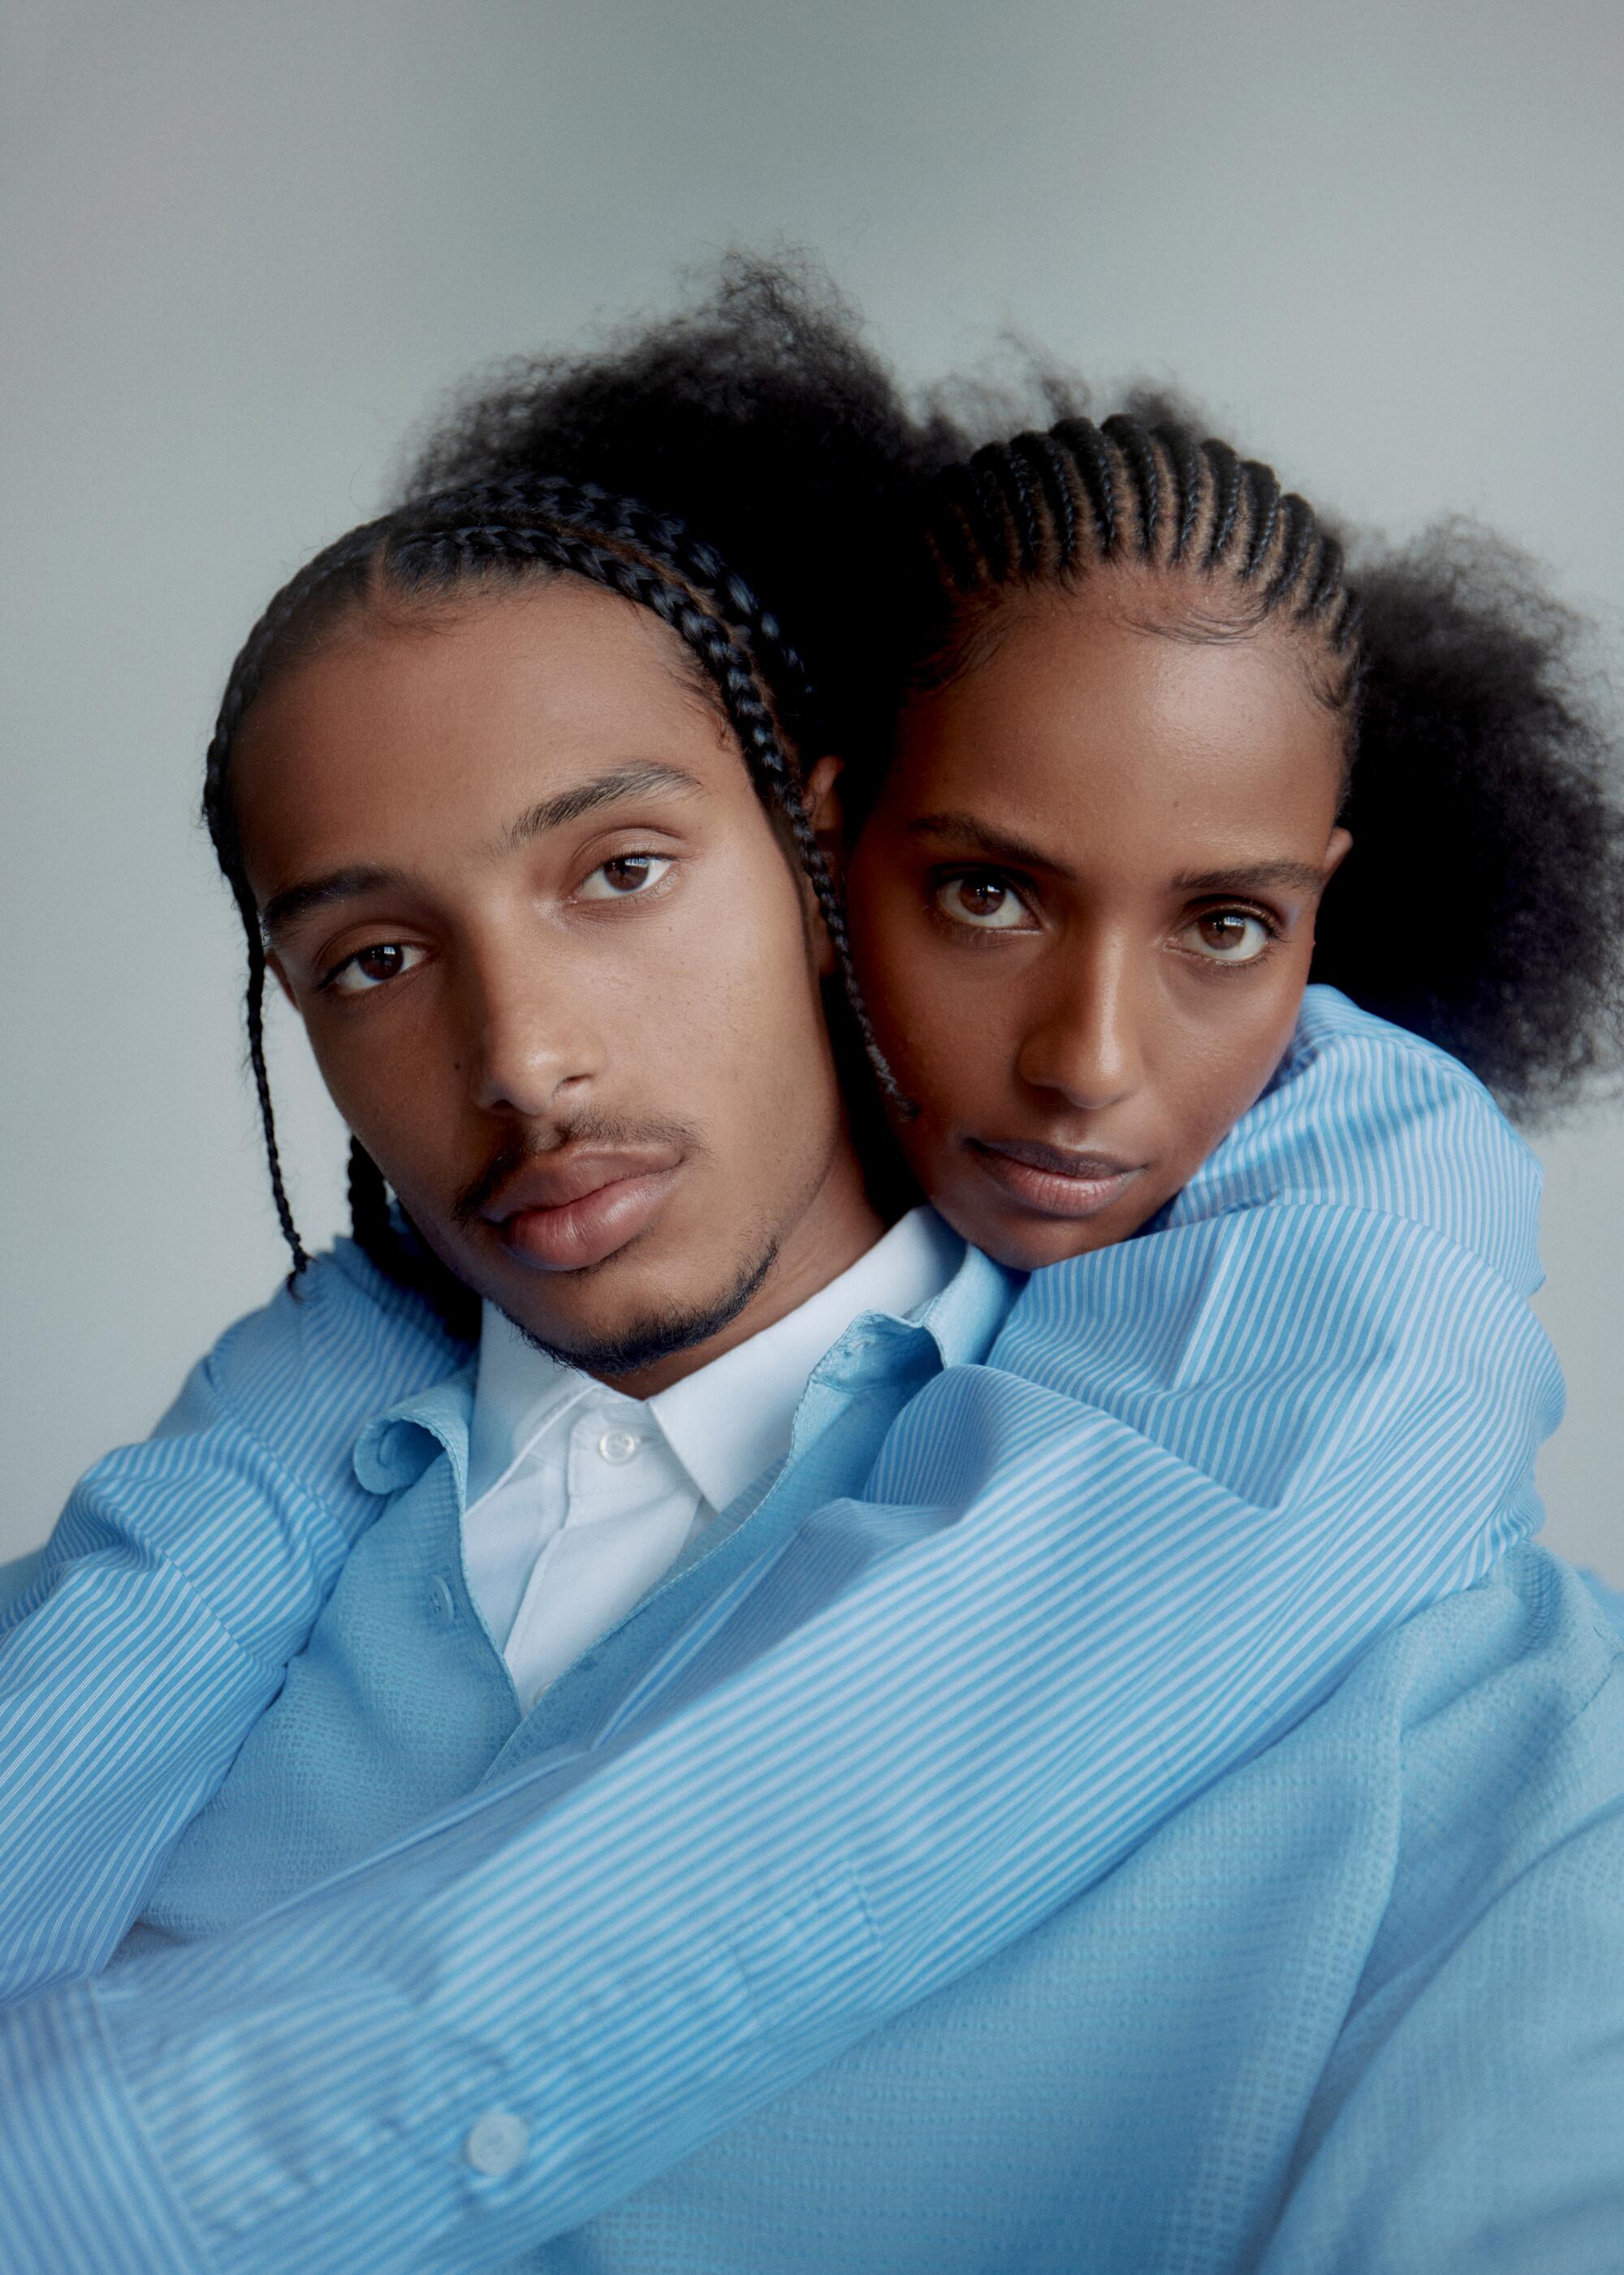 Two models wearing baby blue collared shirts embrace.